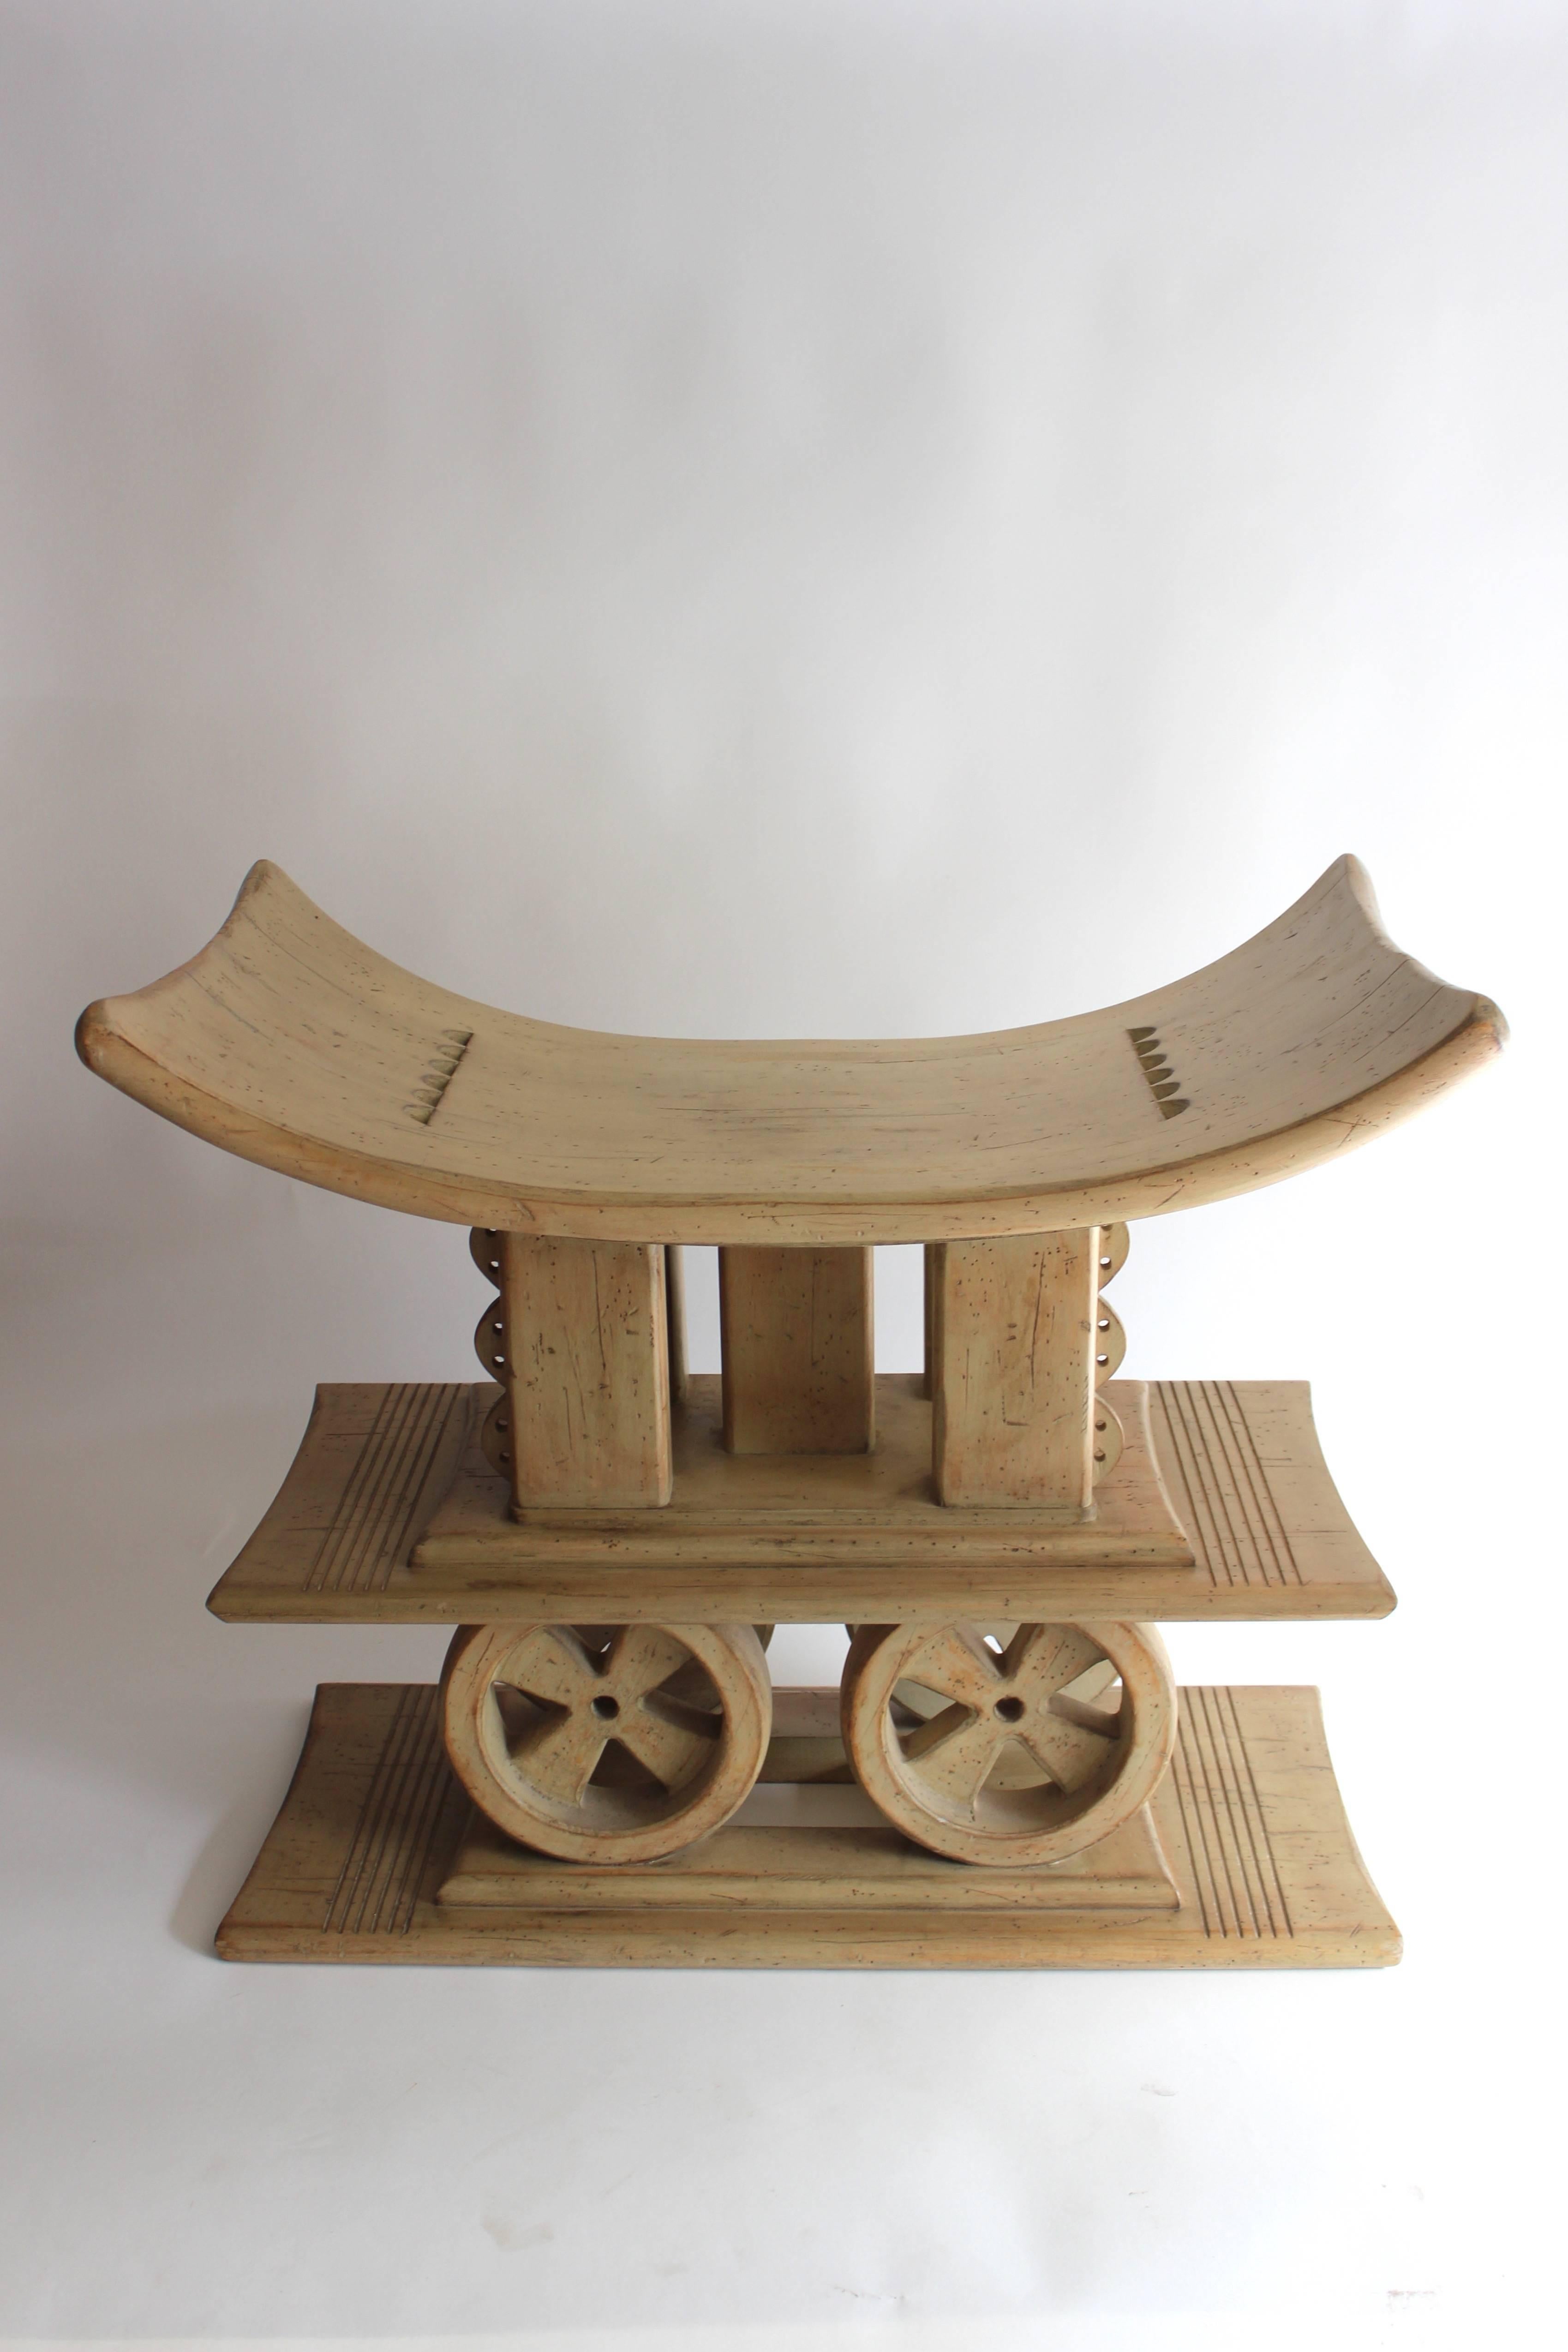 Early 20th century three-tier wood seat by Andre Groult.